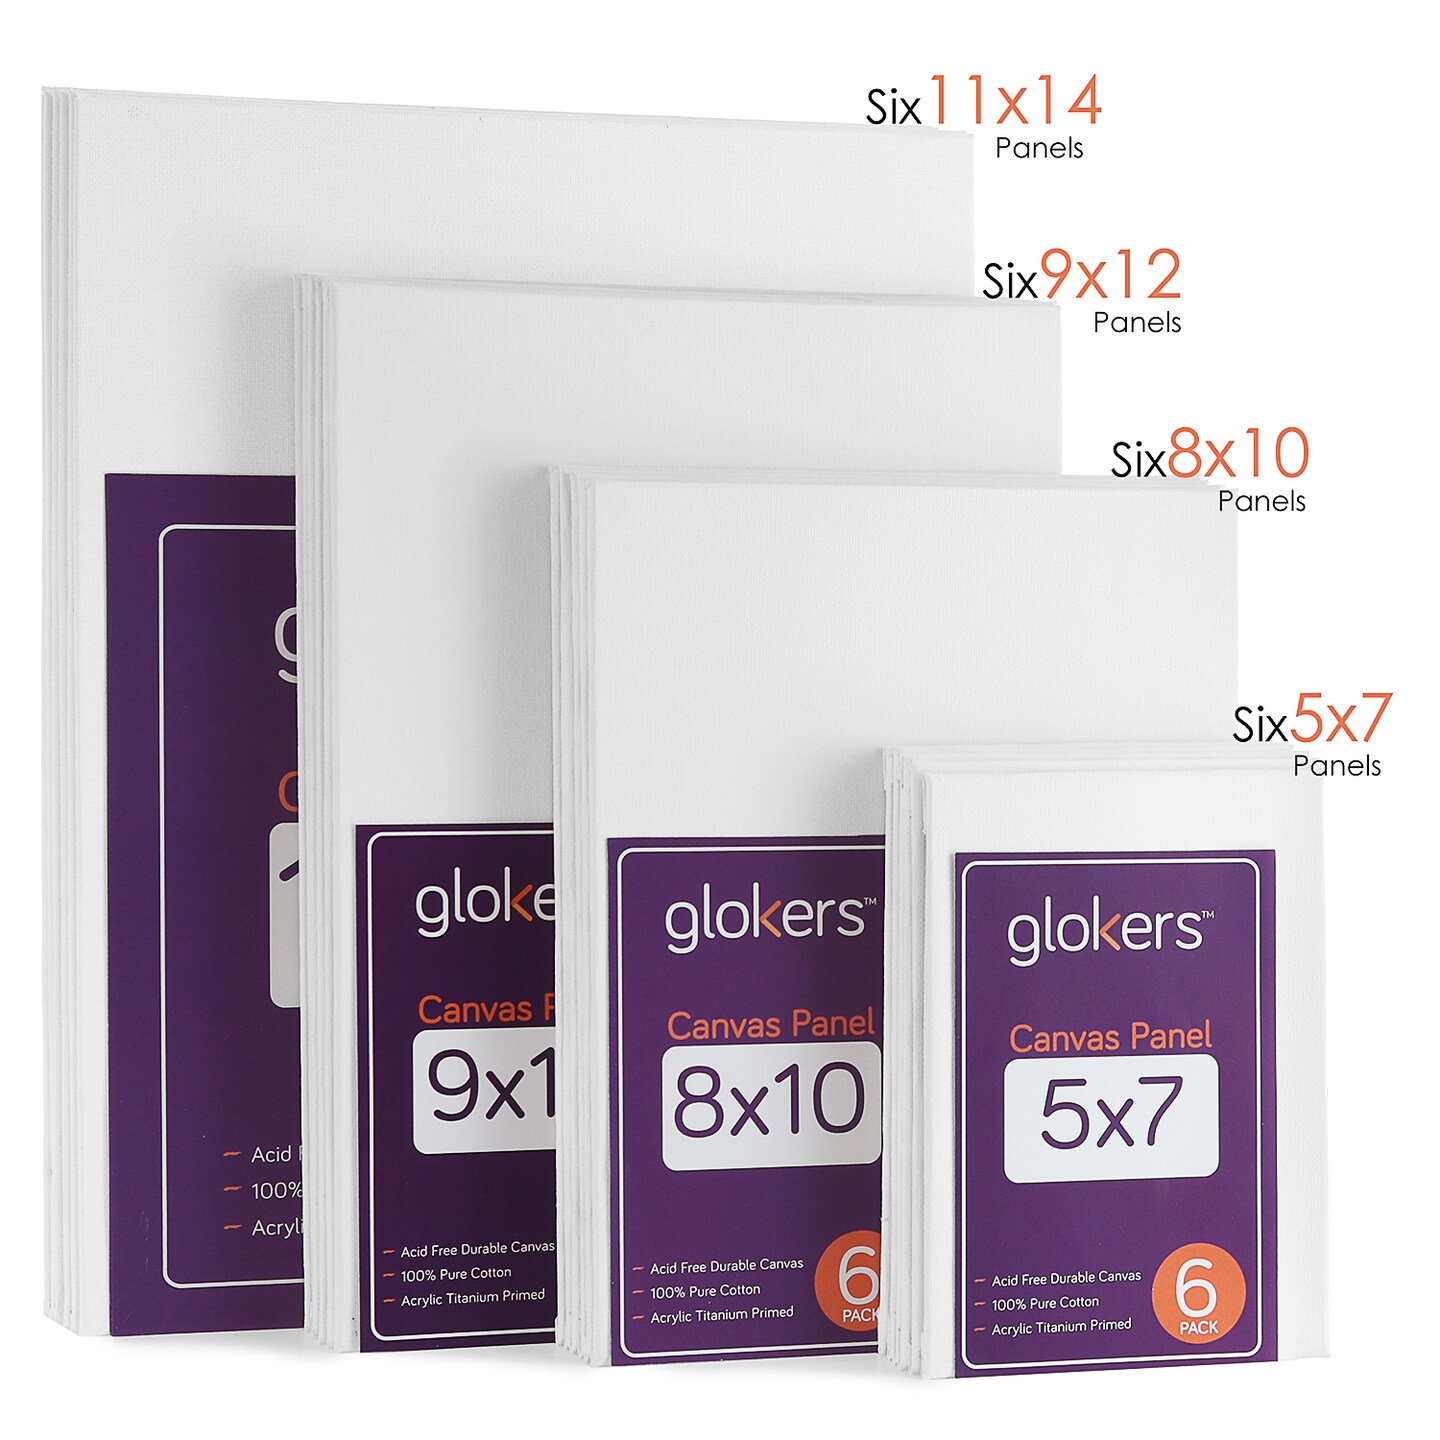 glokers Multi-Pack White Cotton Canvas Panels - 24 Blank Primed Painting Canvases for Wet &#x26; Dry Art Media, Acrylic, Oil, Gouache &#x26; Tempera - Professional Grade Artist Painting Canvases in 4 Sizes Media, Acrylic, Oil, Gouache &#x26; Tempera